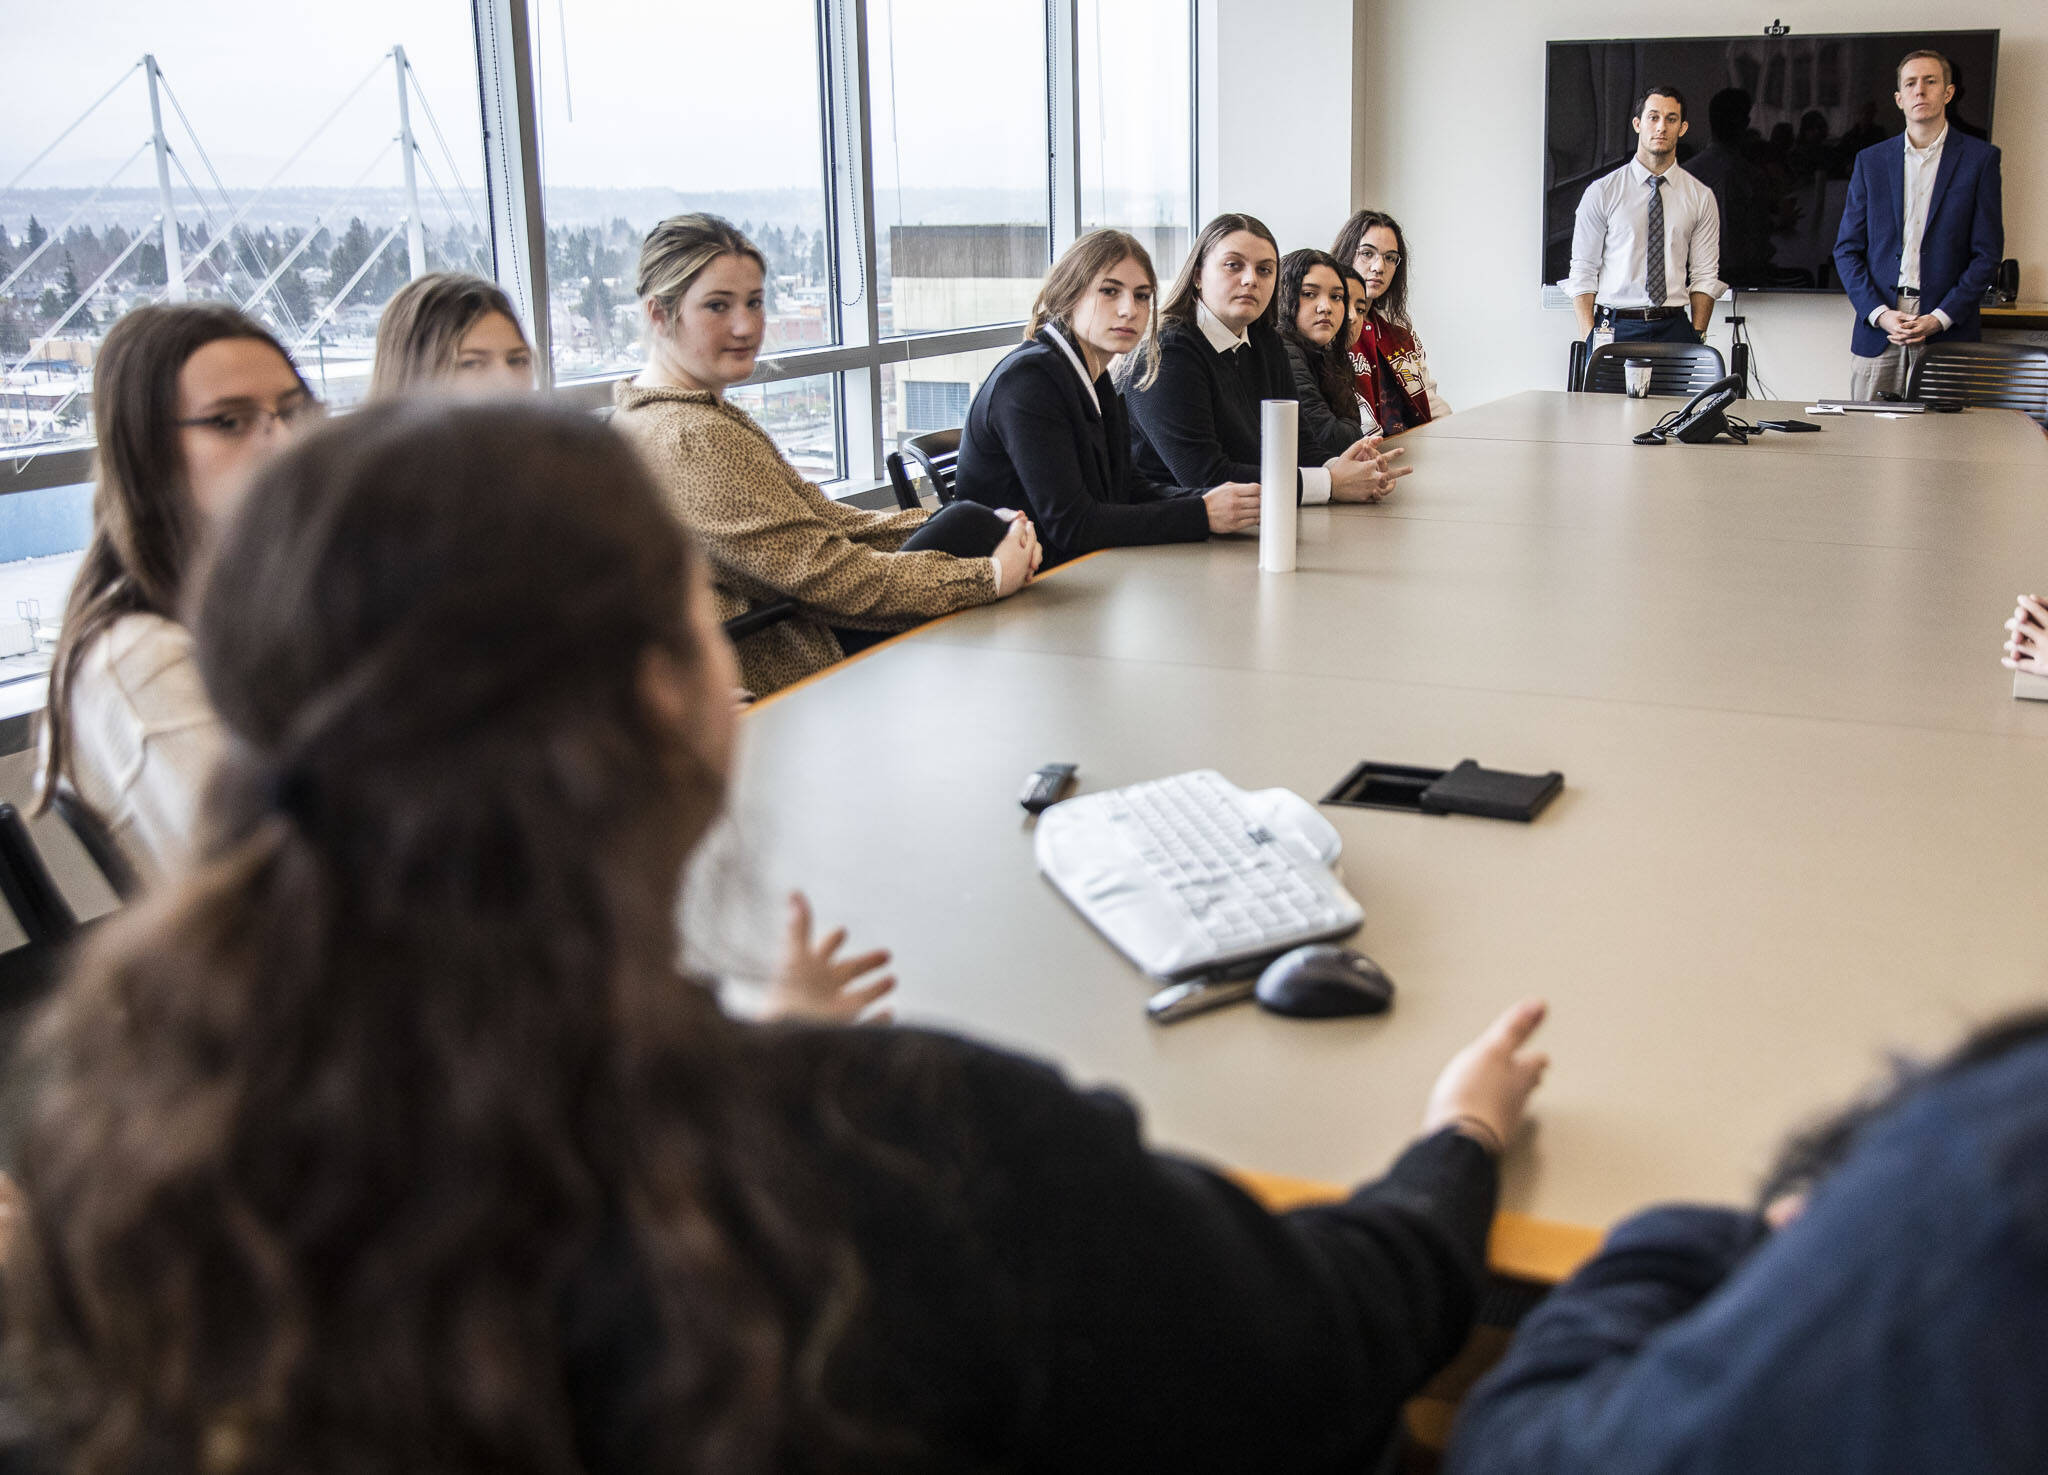 Marysville Pilchuck High School students talk with Snohomish County council members Jared Mead and Nate Nehring during a Civic Engagement Day at the county administration campus In January in Everett. (Olivia Vanni / The Herald file photo)